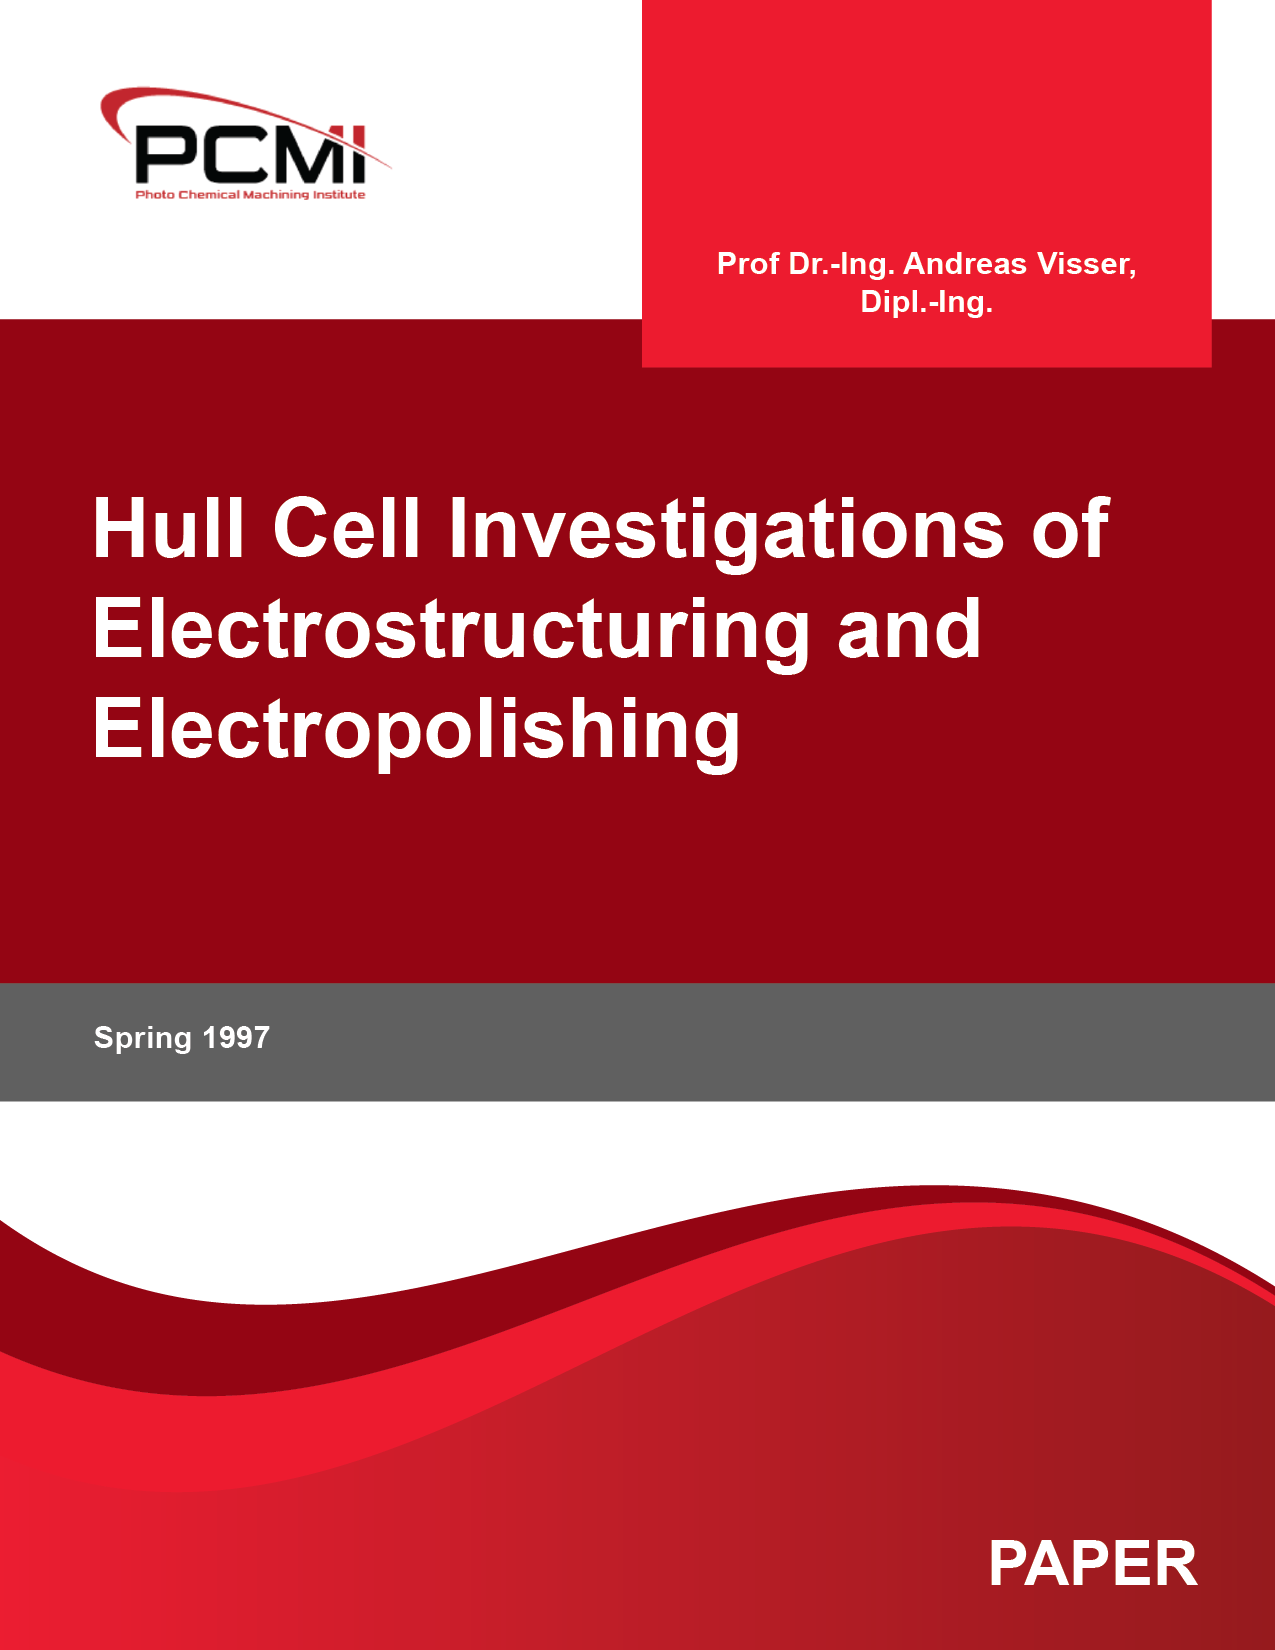 Hull Cell Investigations of Electrostructuring and Electropolishing